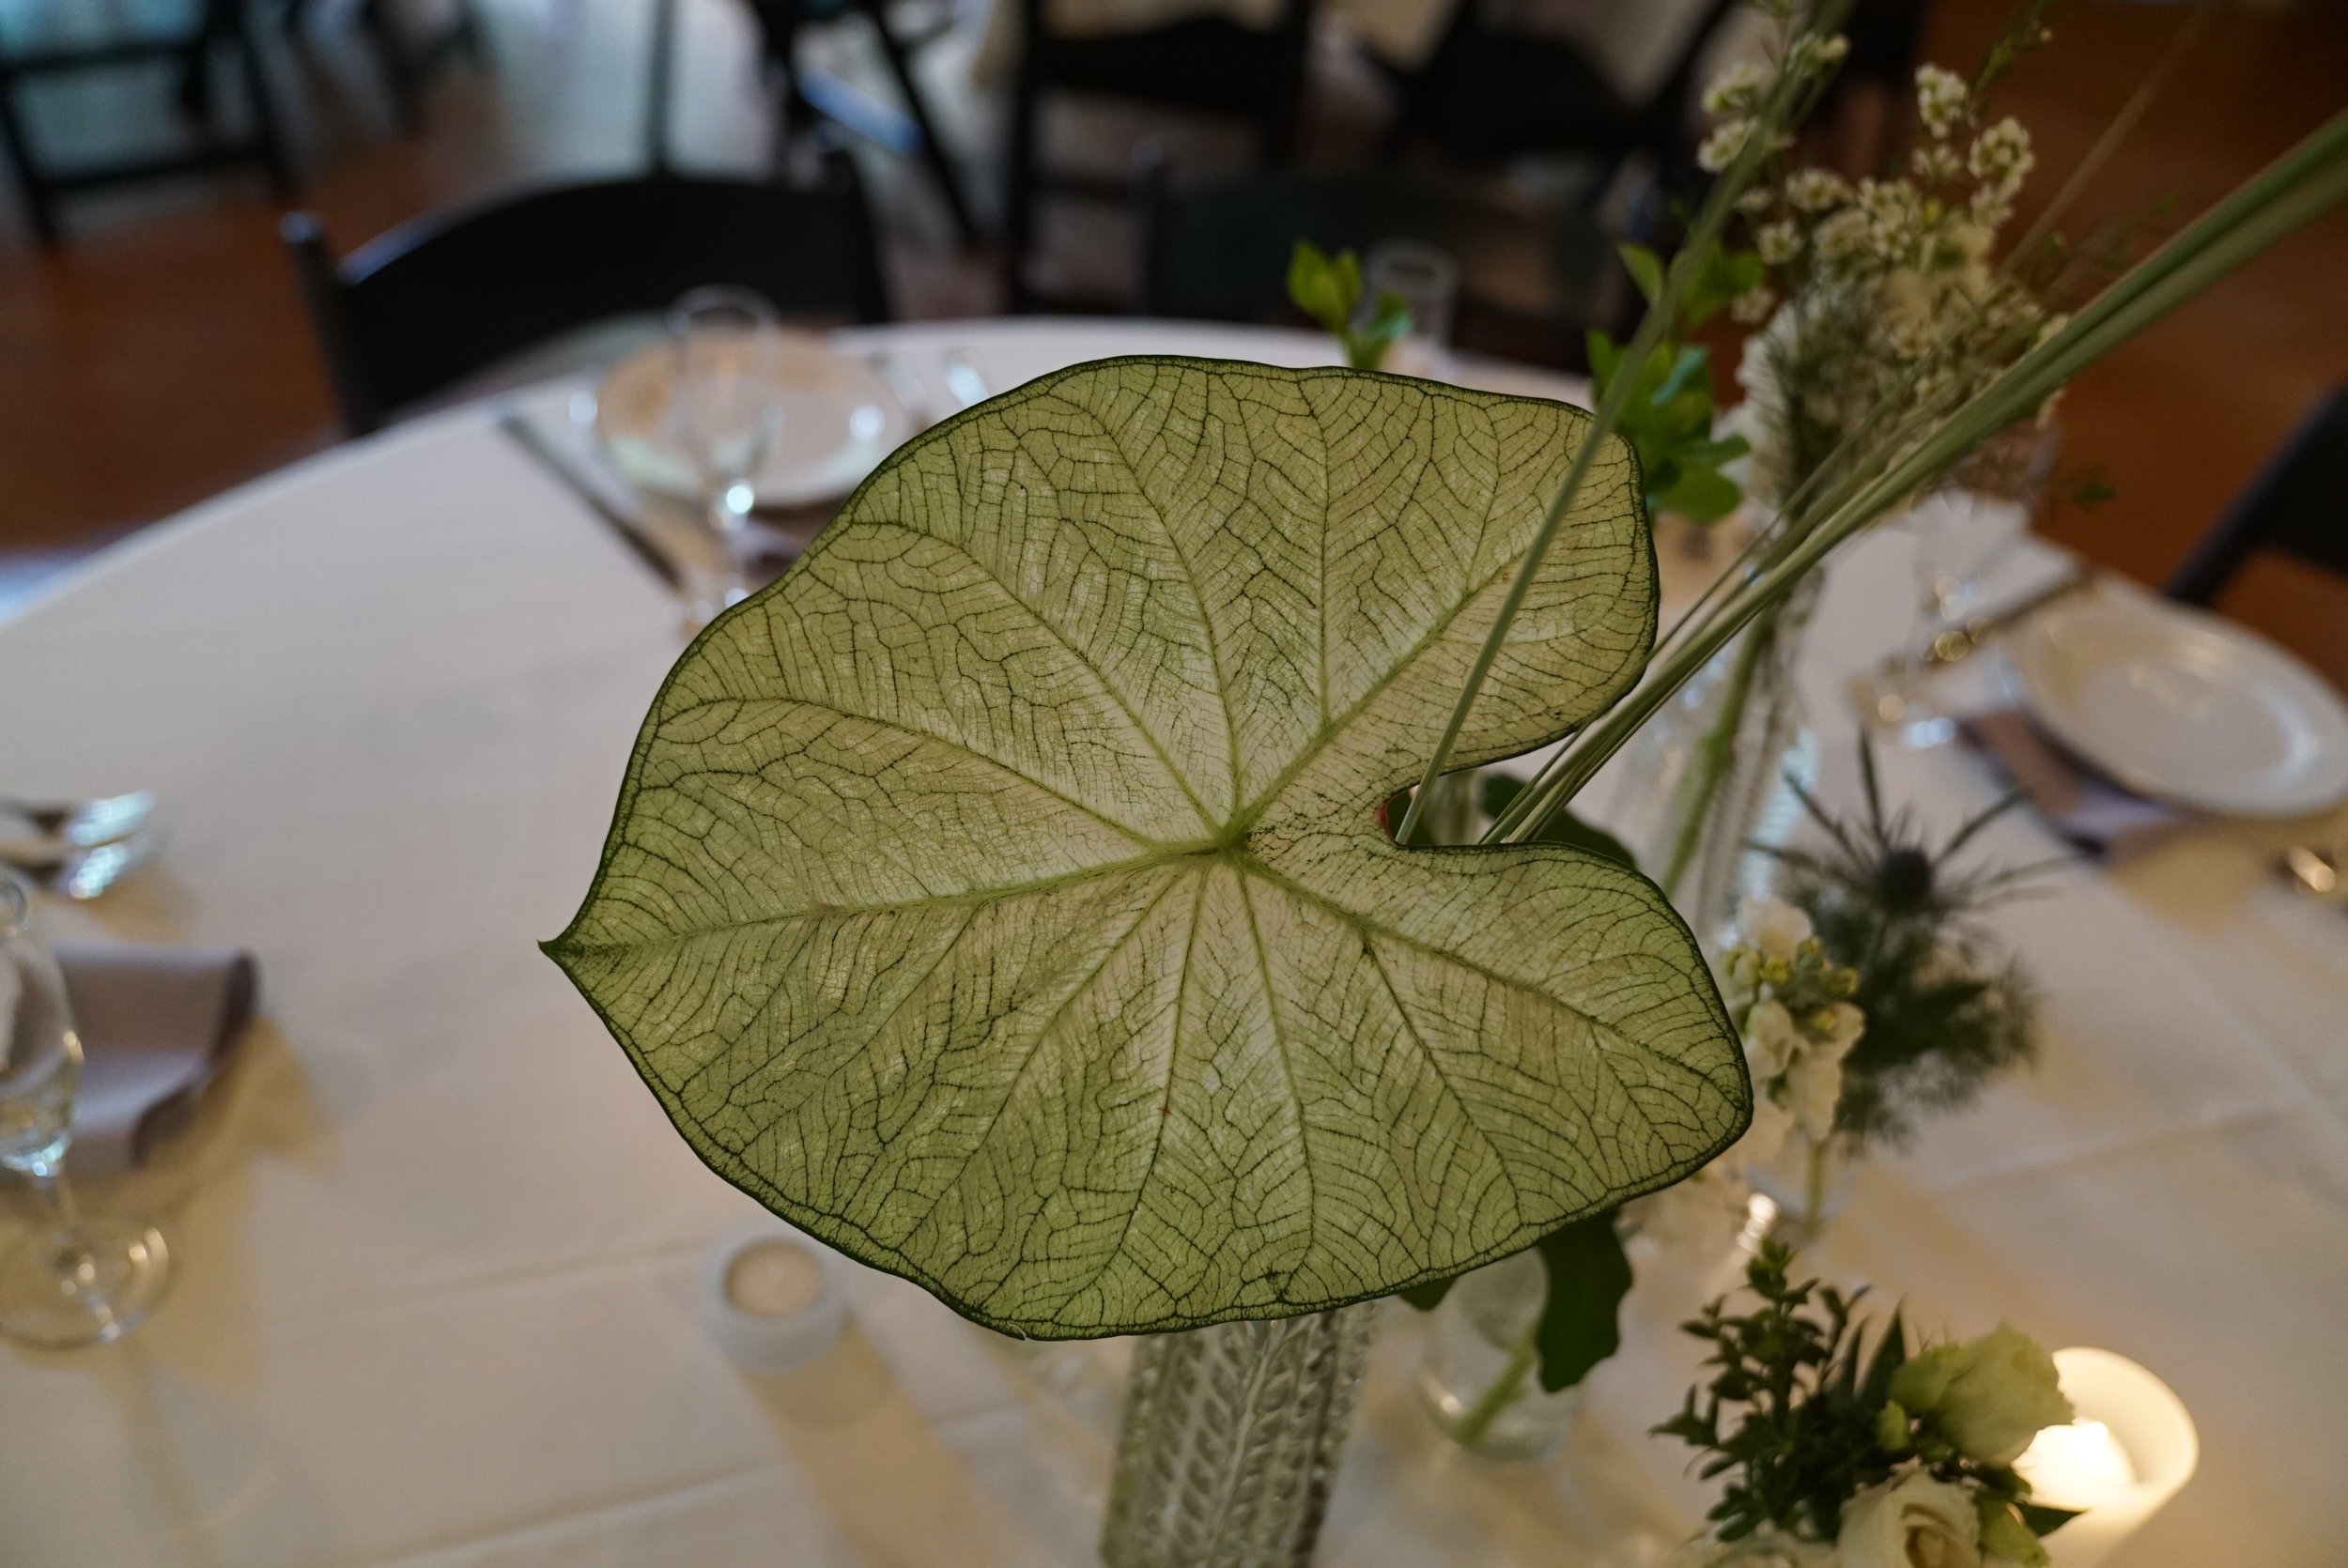  One of my favorite parts of the decor....giant caladium leaves. These were grown from bulbs starting in early July with the wedding in mind. Thanks to warm temperatures extending into September, we were able to harvest them at their peak. These are 